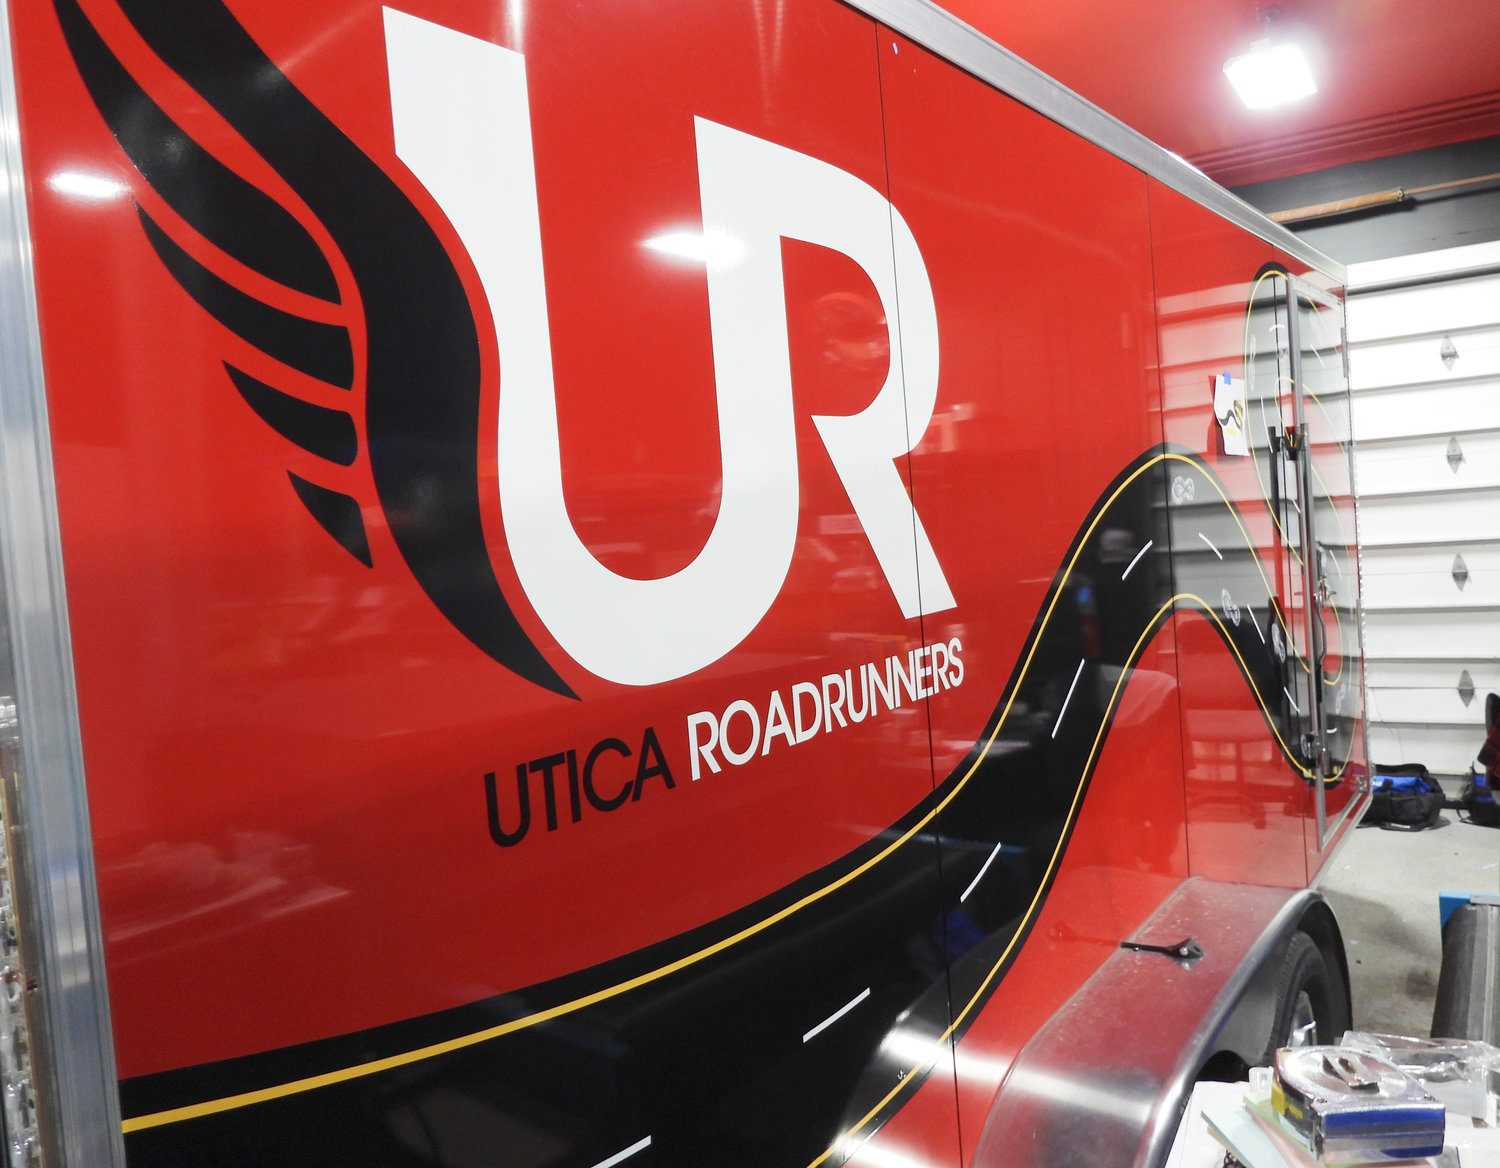 ROAD RUNNERS — The Utica RoadRunners, a running club based in Utica, gets a trailer outfitted with their decal — all ready for warm weather and spring fun runs.